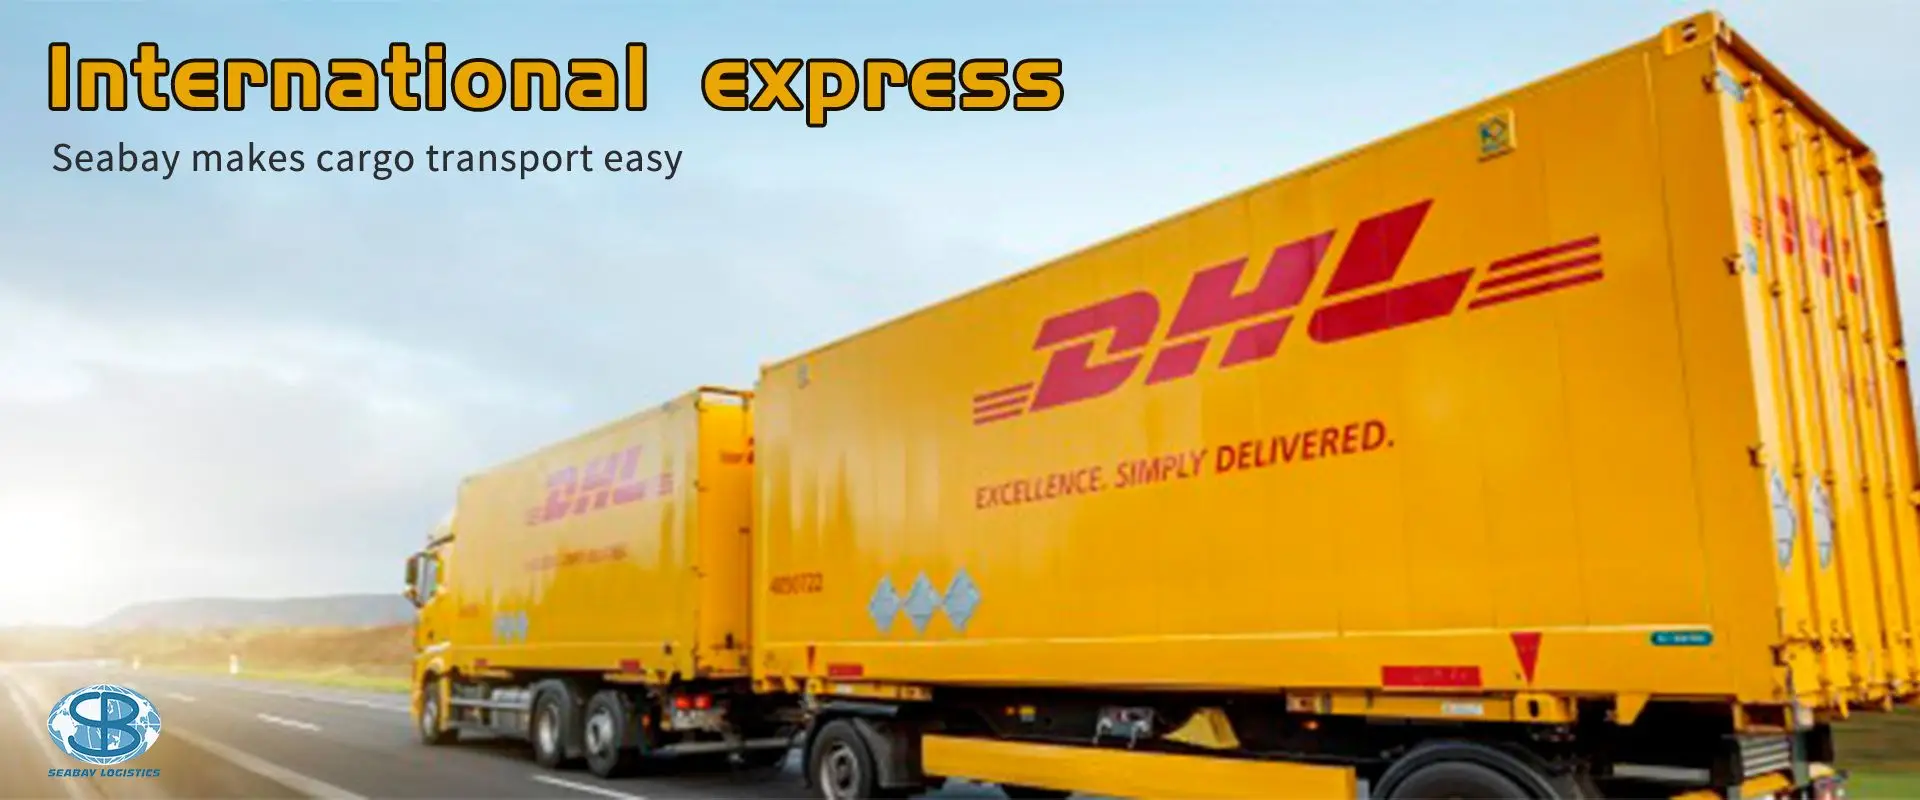 Express Dhl Agent Shipping Rates From China To Ghana/usa/canada/uk ...